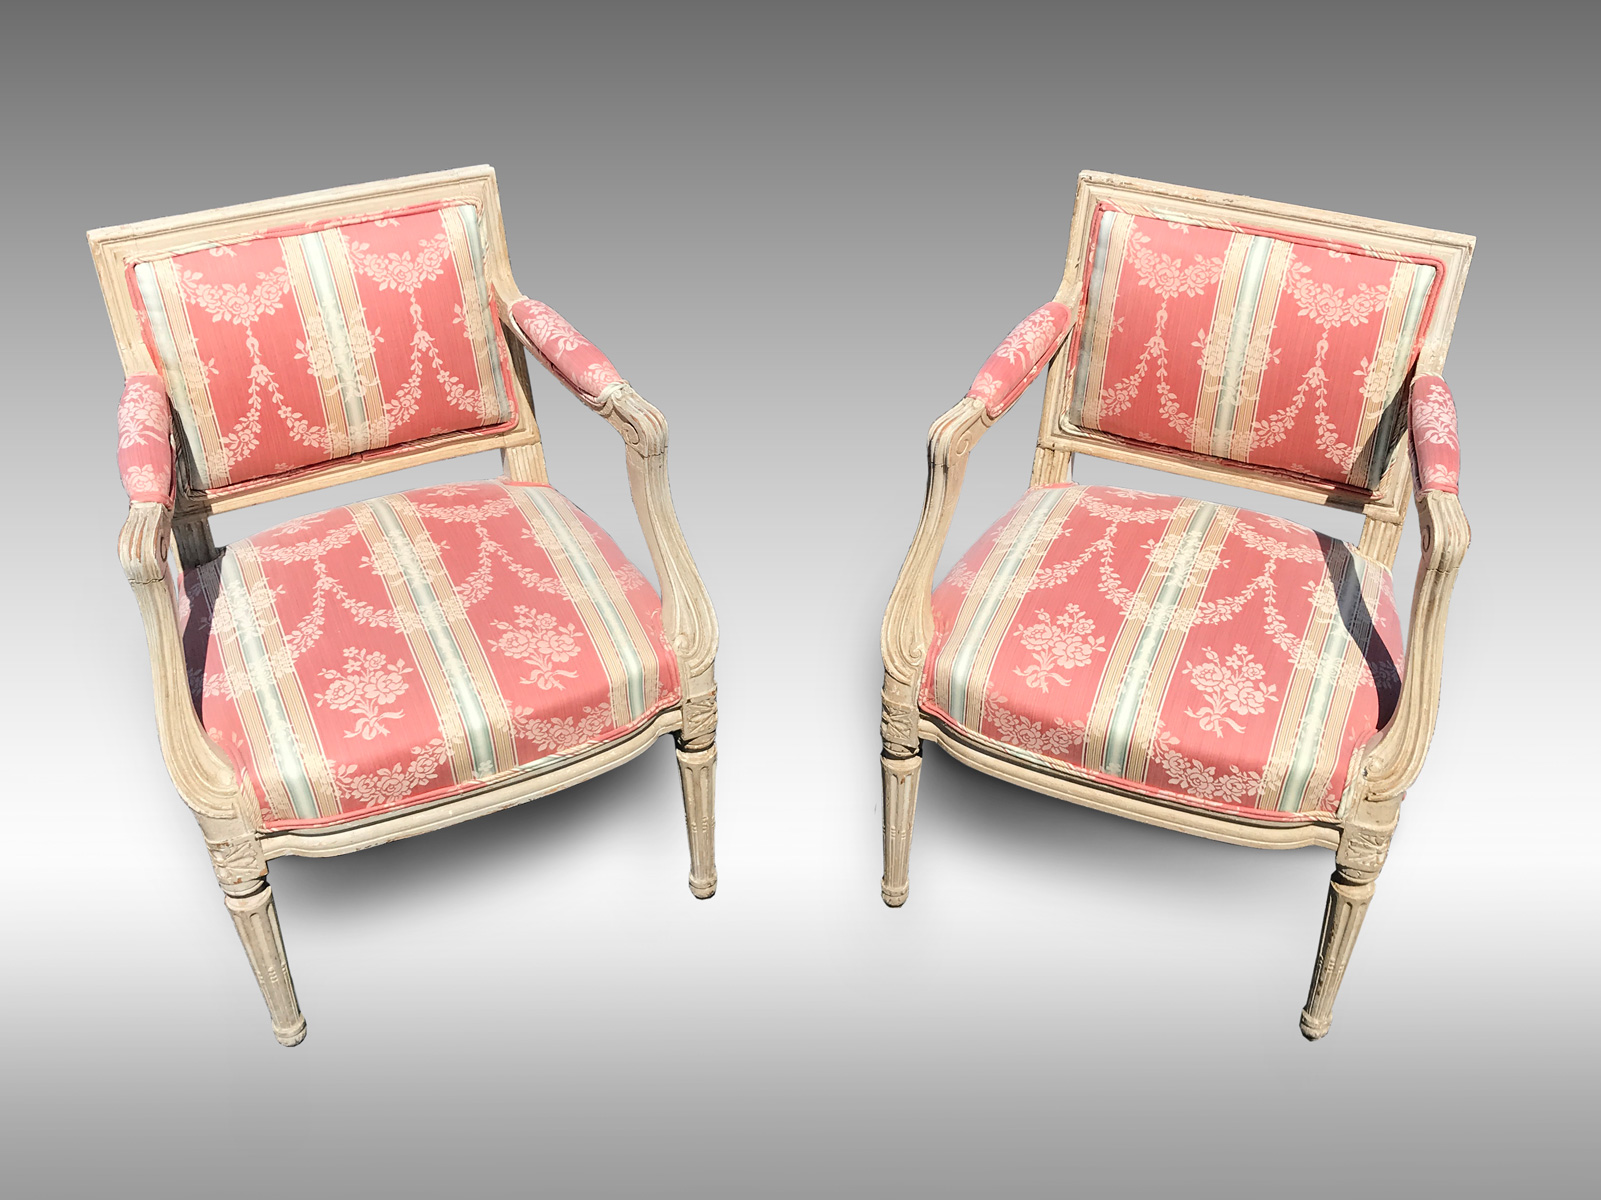 PAIR OF CARVED FRENCH CHILDS ARMCHAIRS: